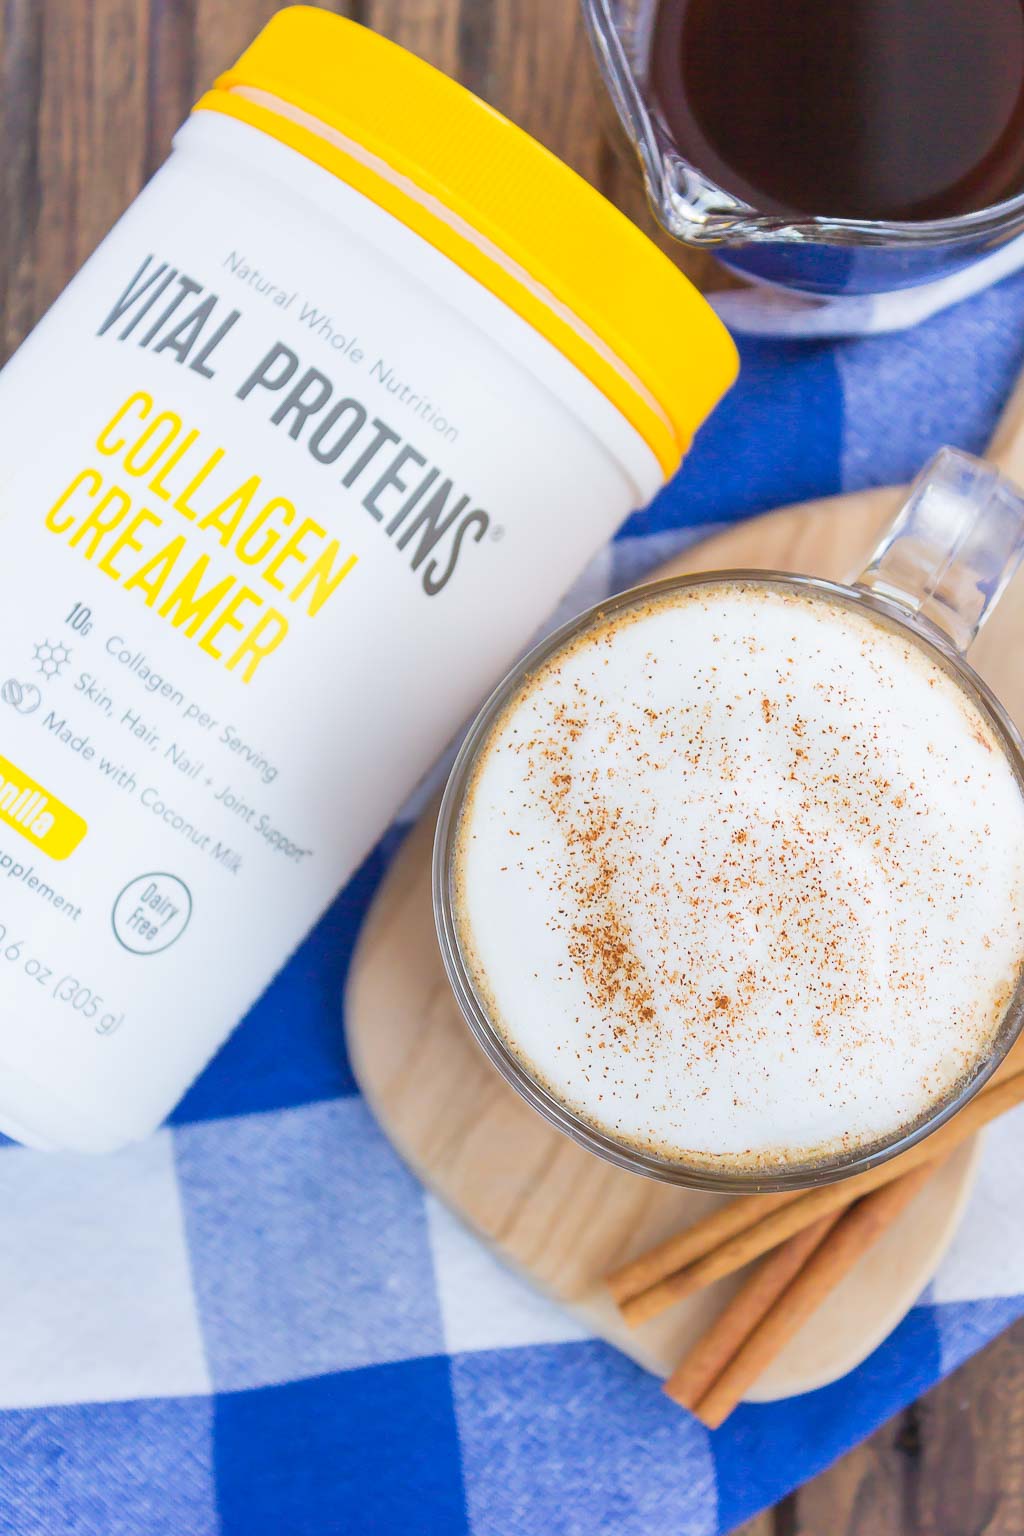 This Cinnamon Vanilla Latte is filled with cozy flavors and ready in less than ten minutes. Packed with sweet notes of cinnamon and vanilla, you can skip the coffee shop and make your own latte at home for the fraction of the price and calories!